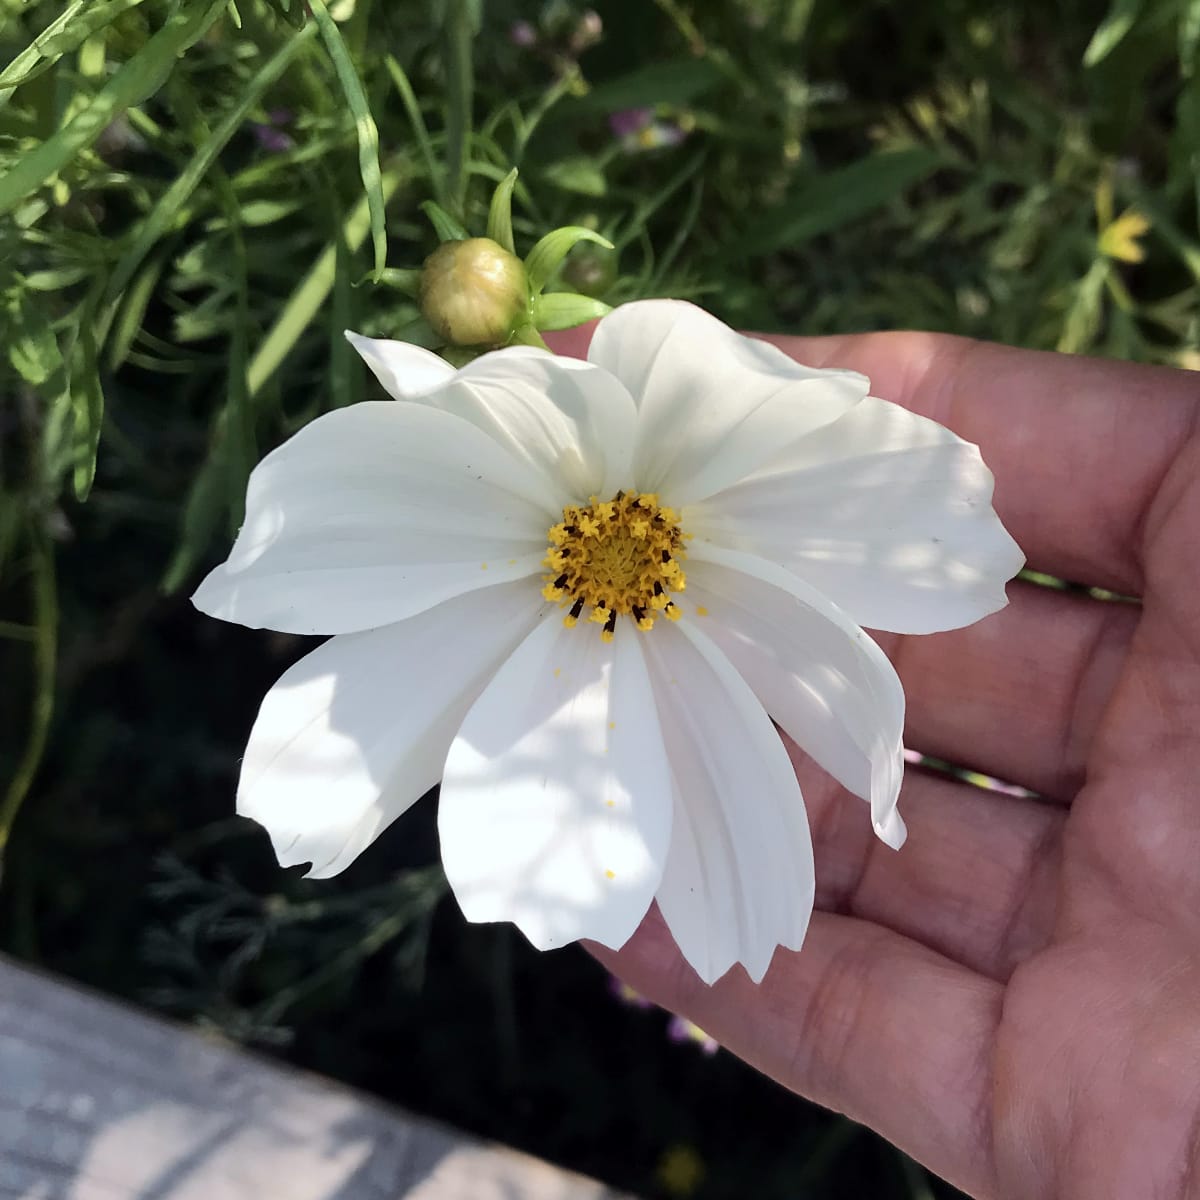 How To Grow Cosmos